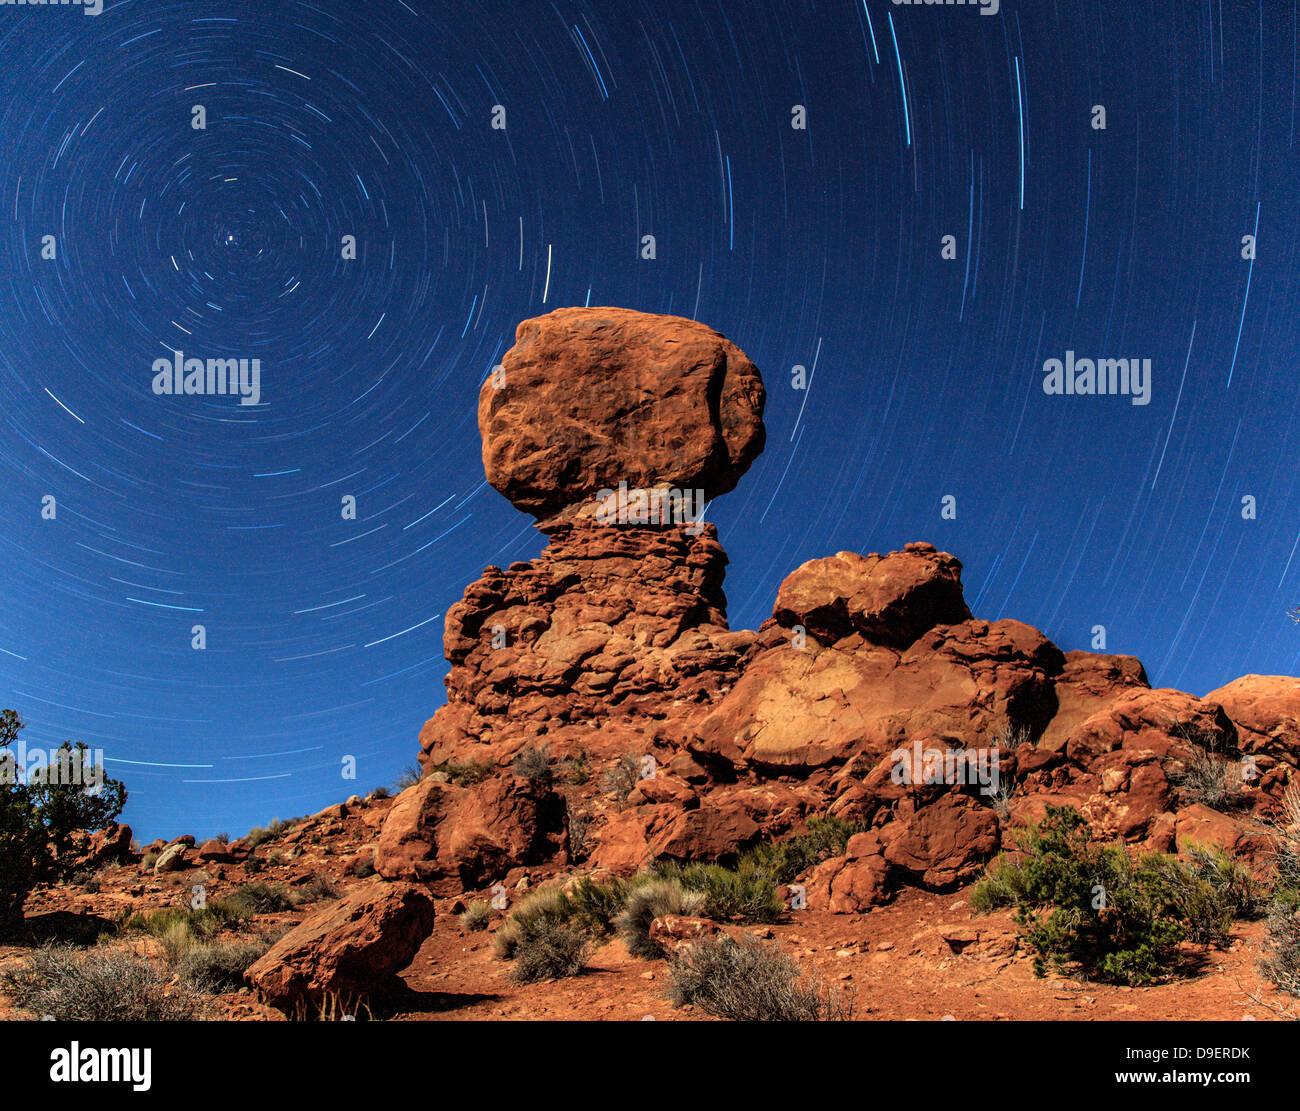 Moab National Park, Time lapse star trails Stock Photo